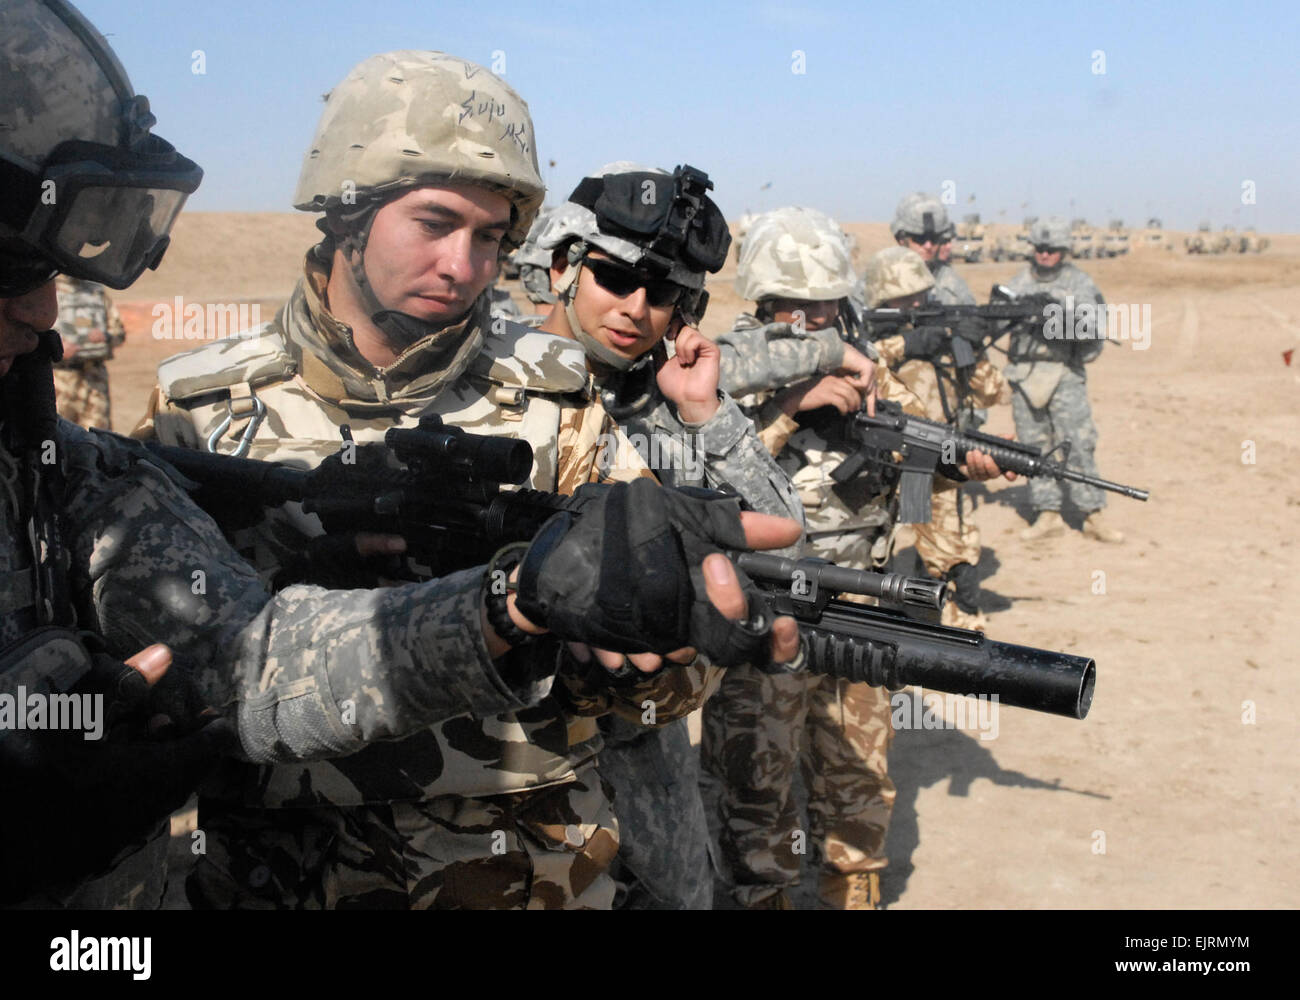 Soldiers of the 4th Brigade Combat Team, 1st Cavalry Division, demonstrate how to operate a M-4 carbine during a training exercise with troops from the 341st Romanian Infantry battalion during a cross-training event at the Bardia Firing Range near COB Adder, Iraq.  Pfc. Terence Ewings Stock Photo